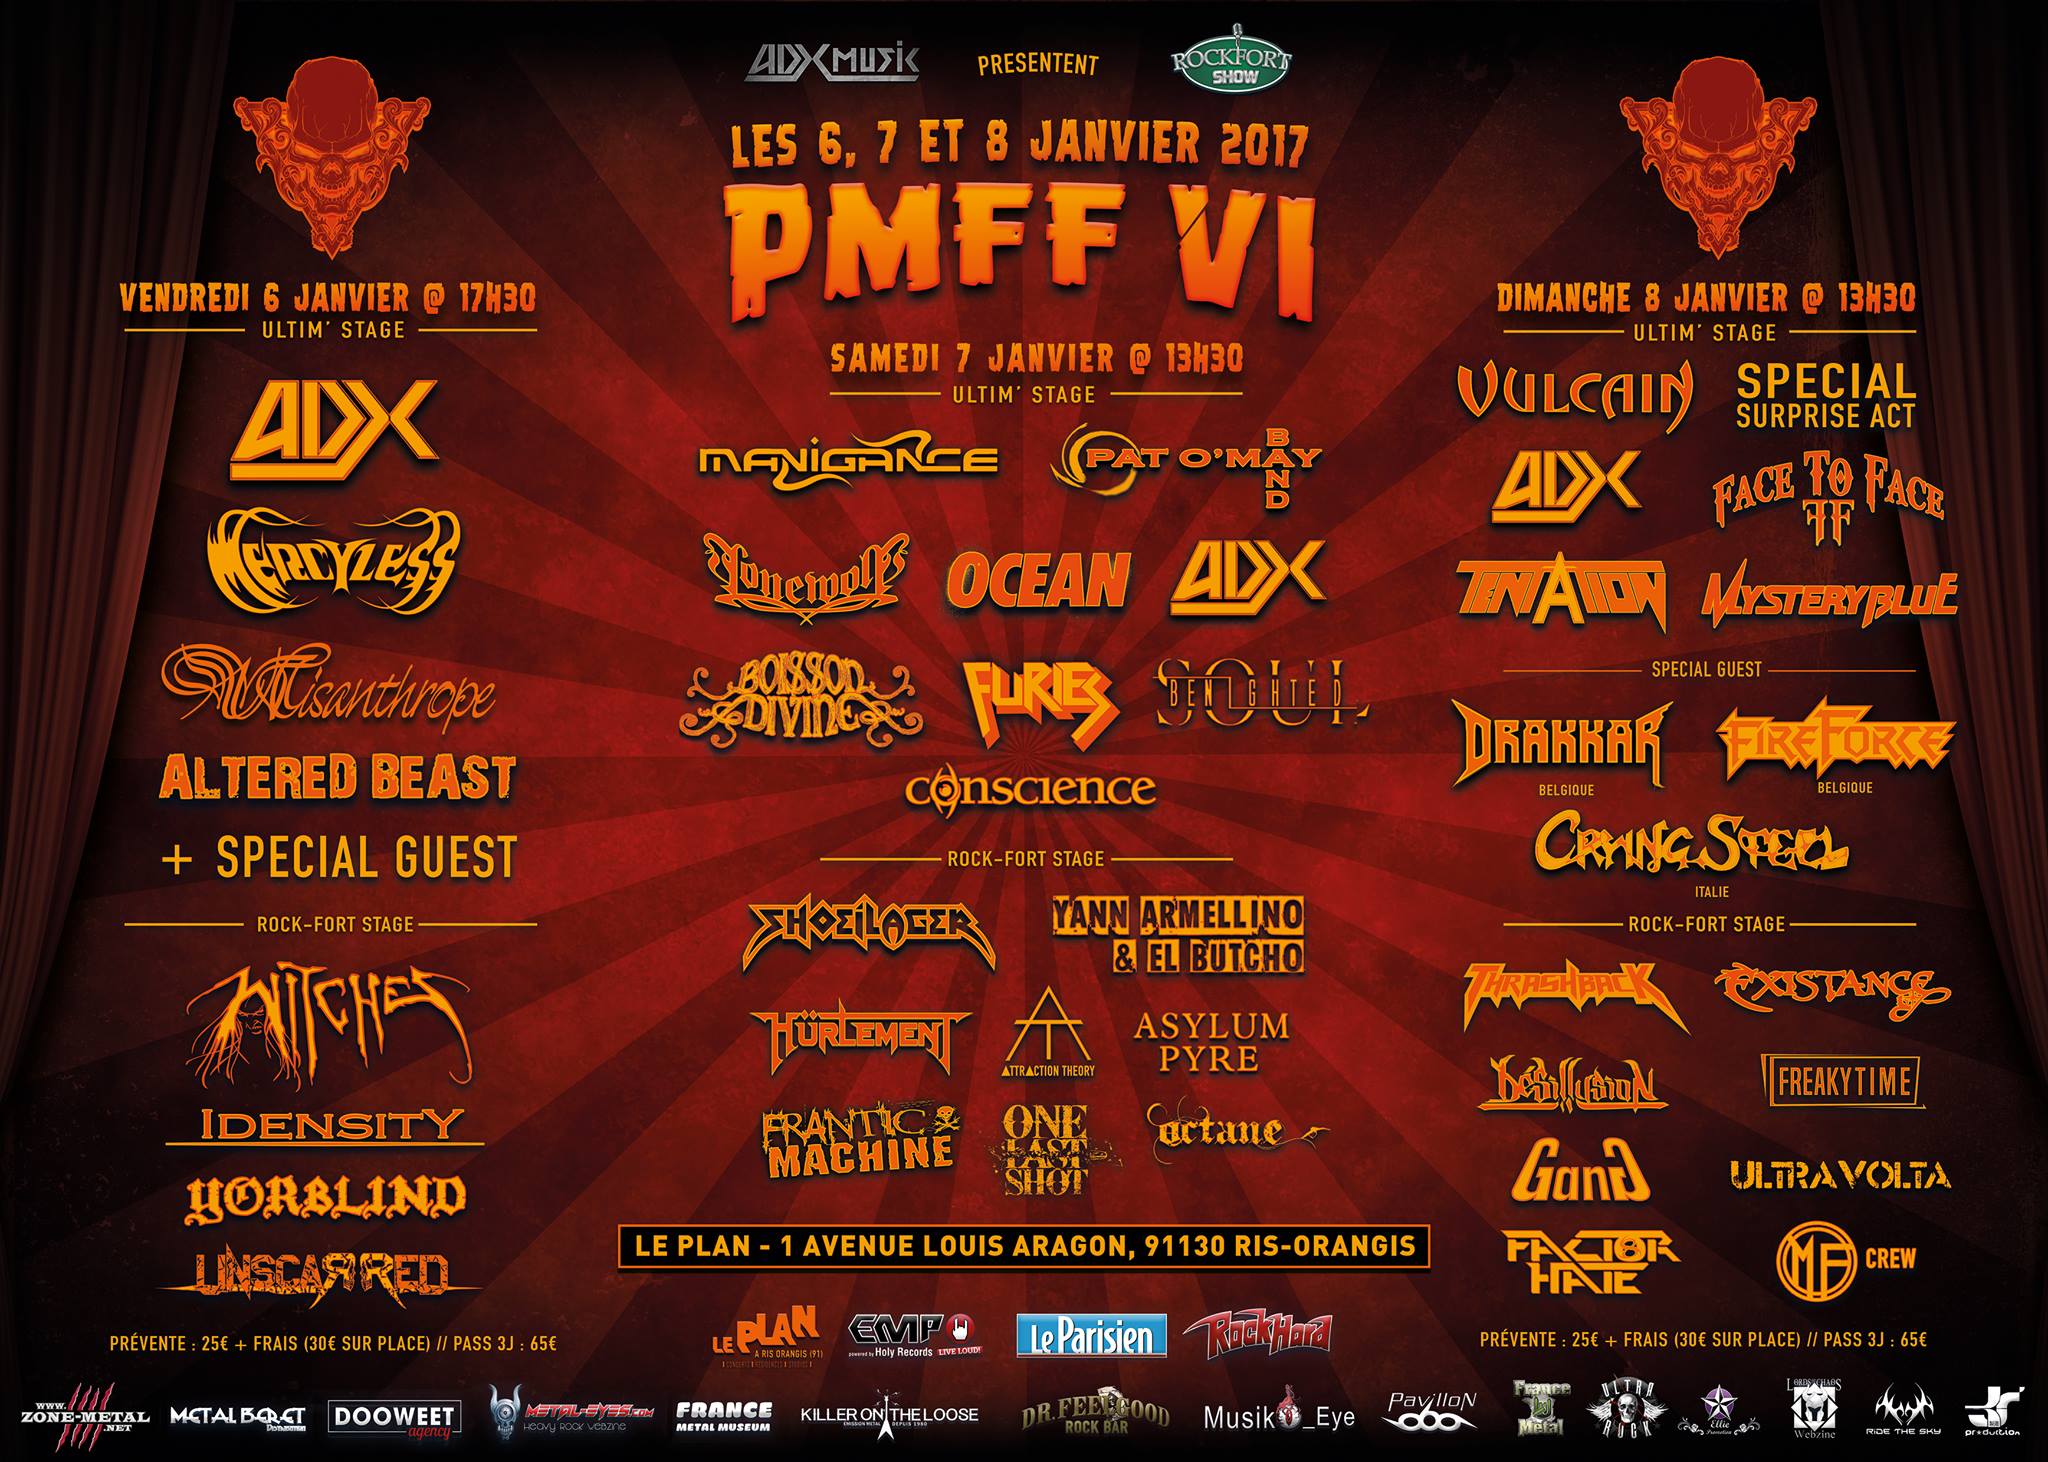 Witches flyer Mercyless, Witches, ADX, Misanthrope, Altered Beast, Yorblind, Idensity​, Unscarred @ Paris Metal France Festival - PMFF #6 Le Plan Ris Orangis (91)